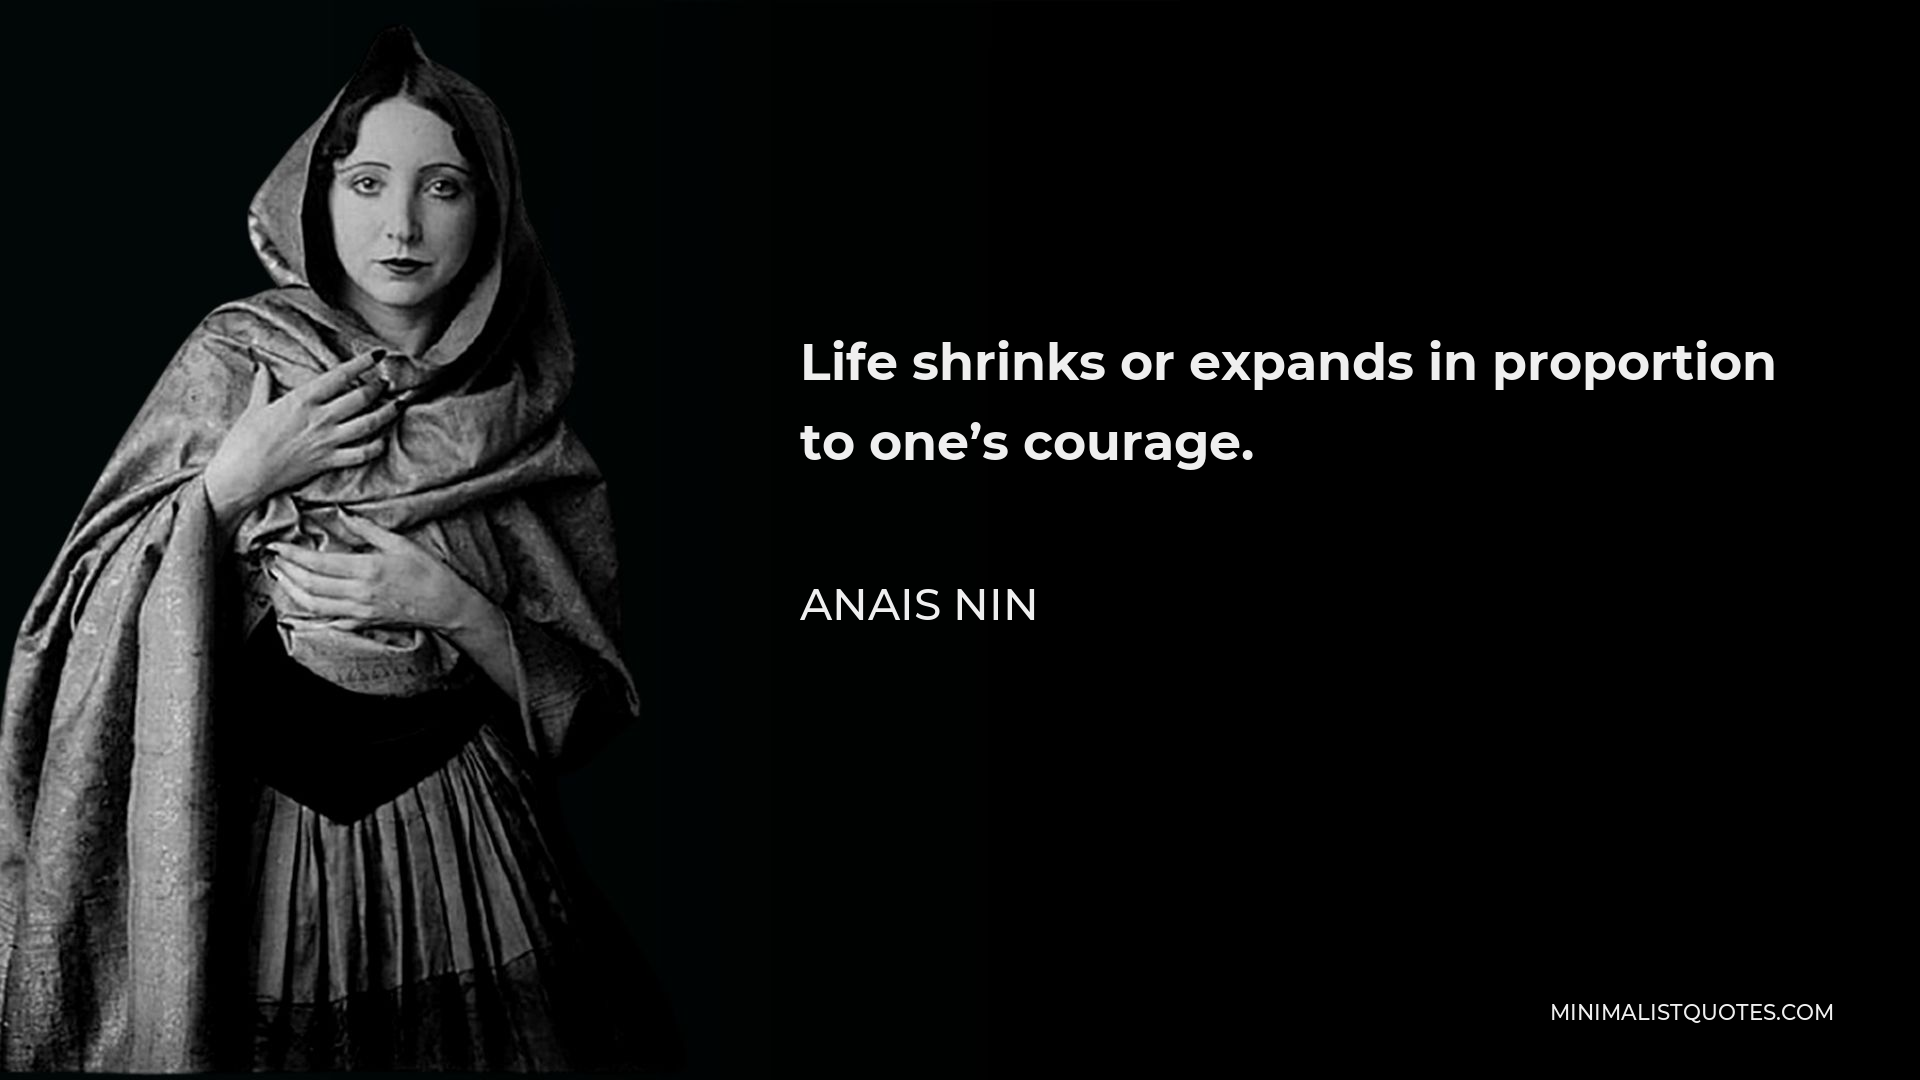 Anais Nin Quote - Life shrinks or expands in proportion to one’s courage.